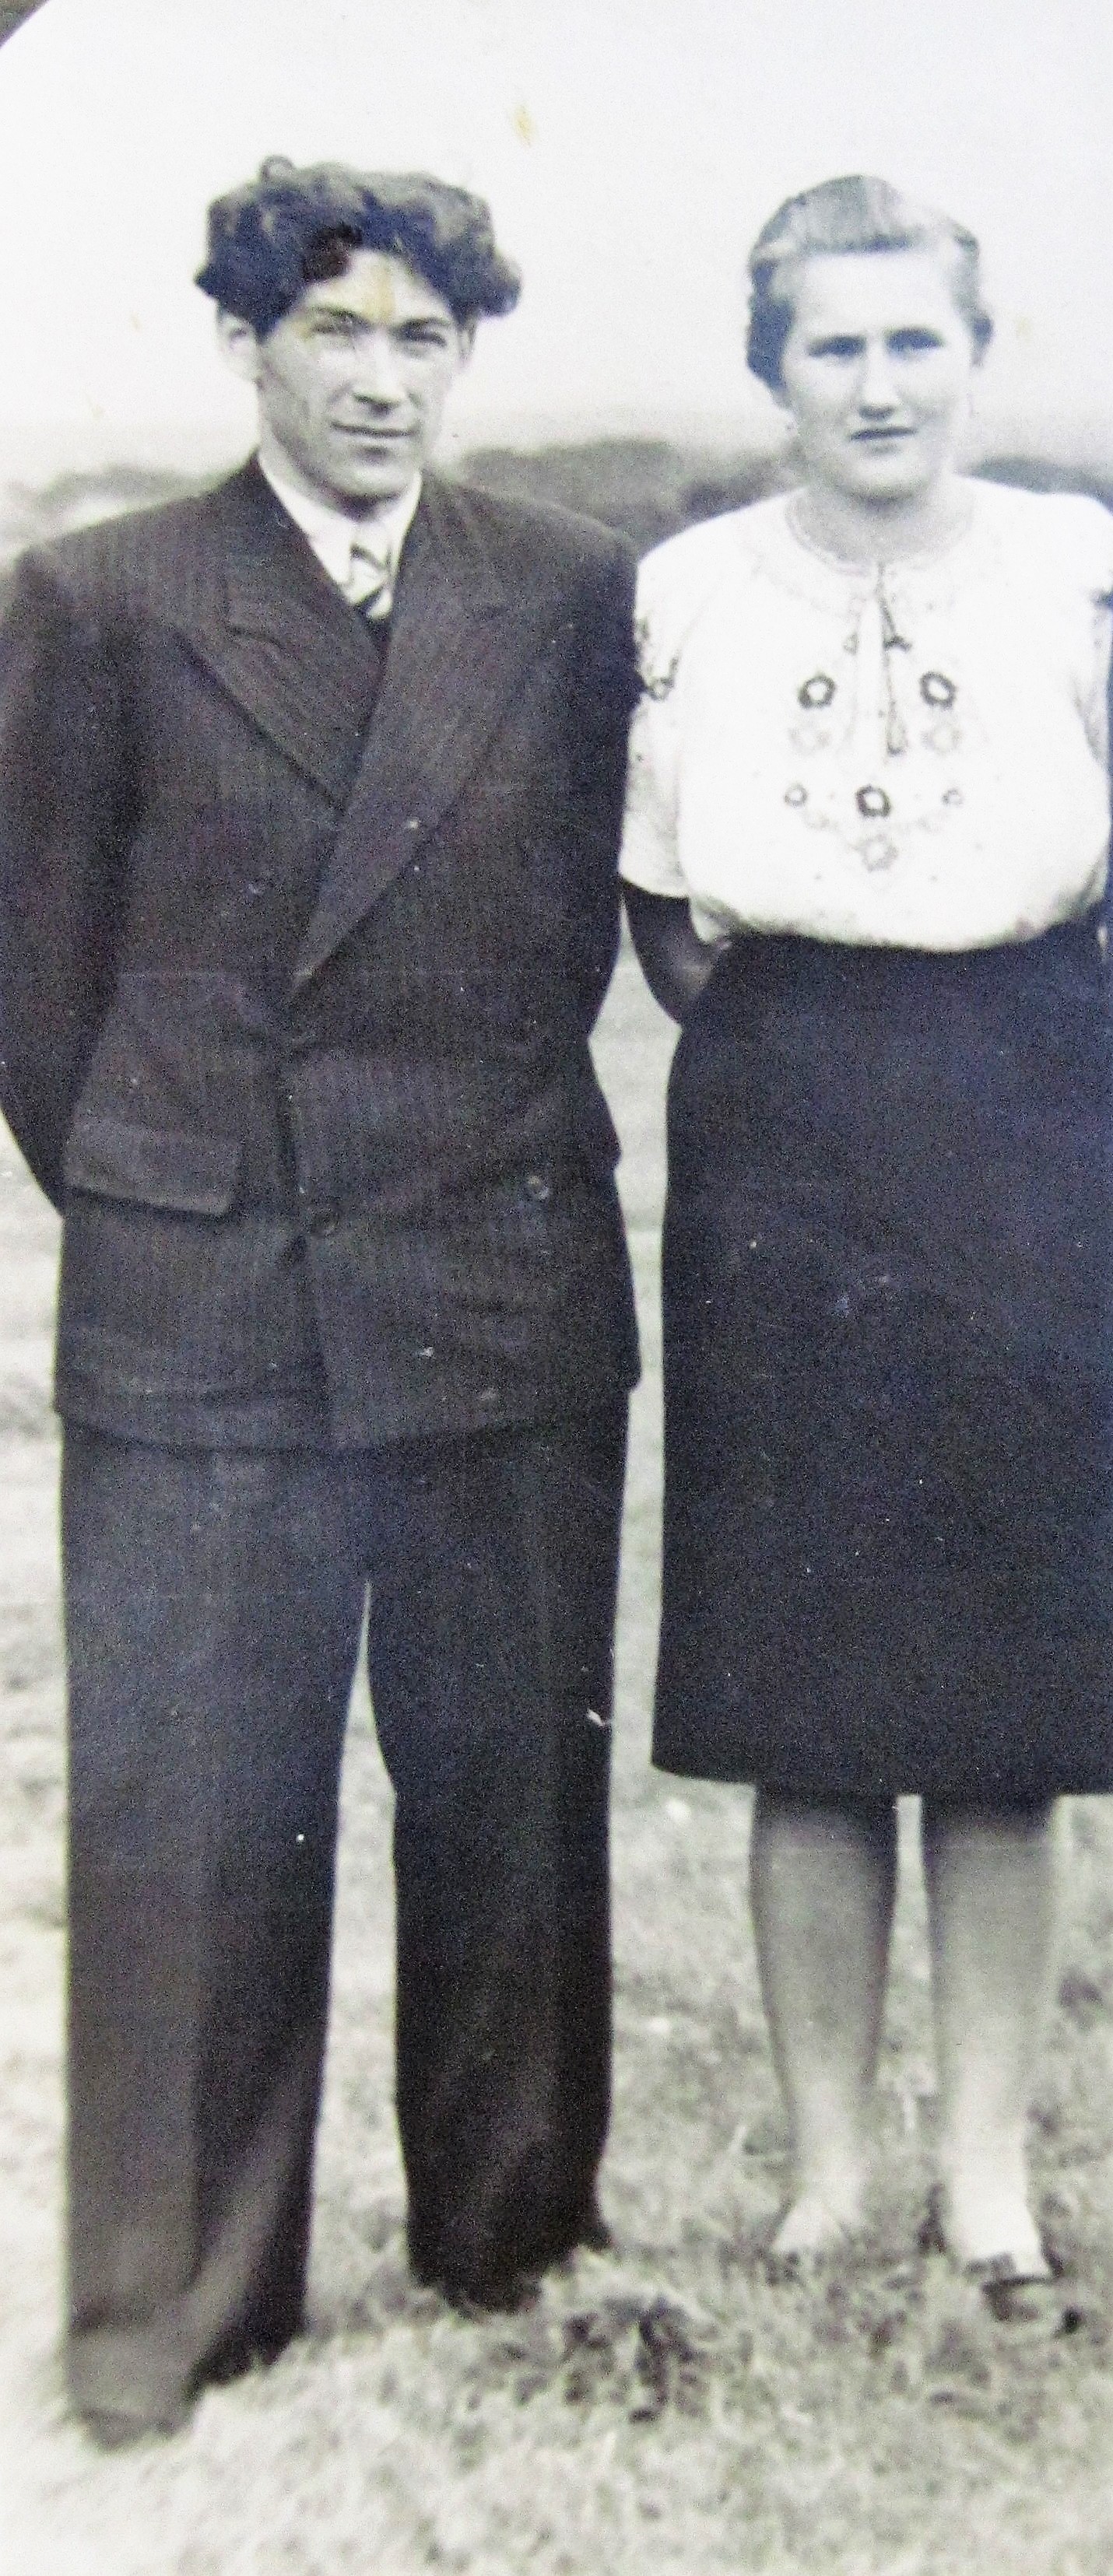 Ivan and Olga Prytulak fled Ukraine during World War II and settled in England in 1948.